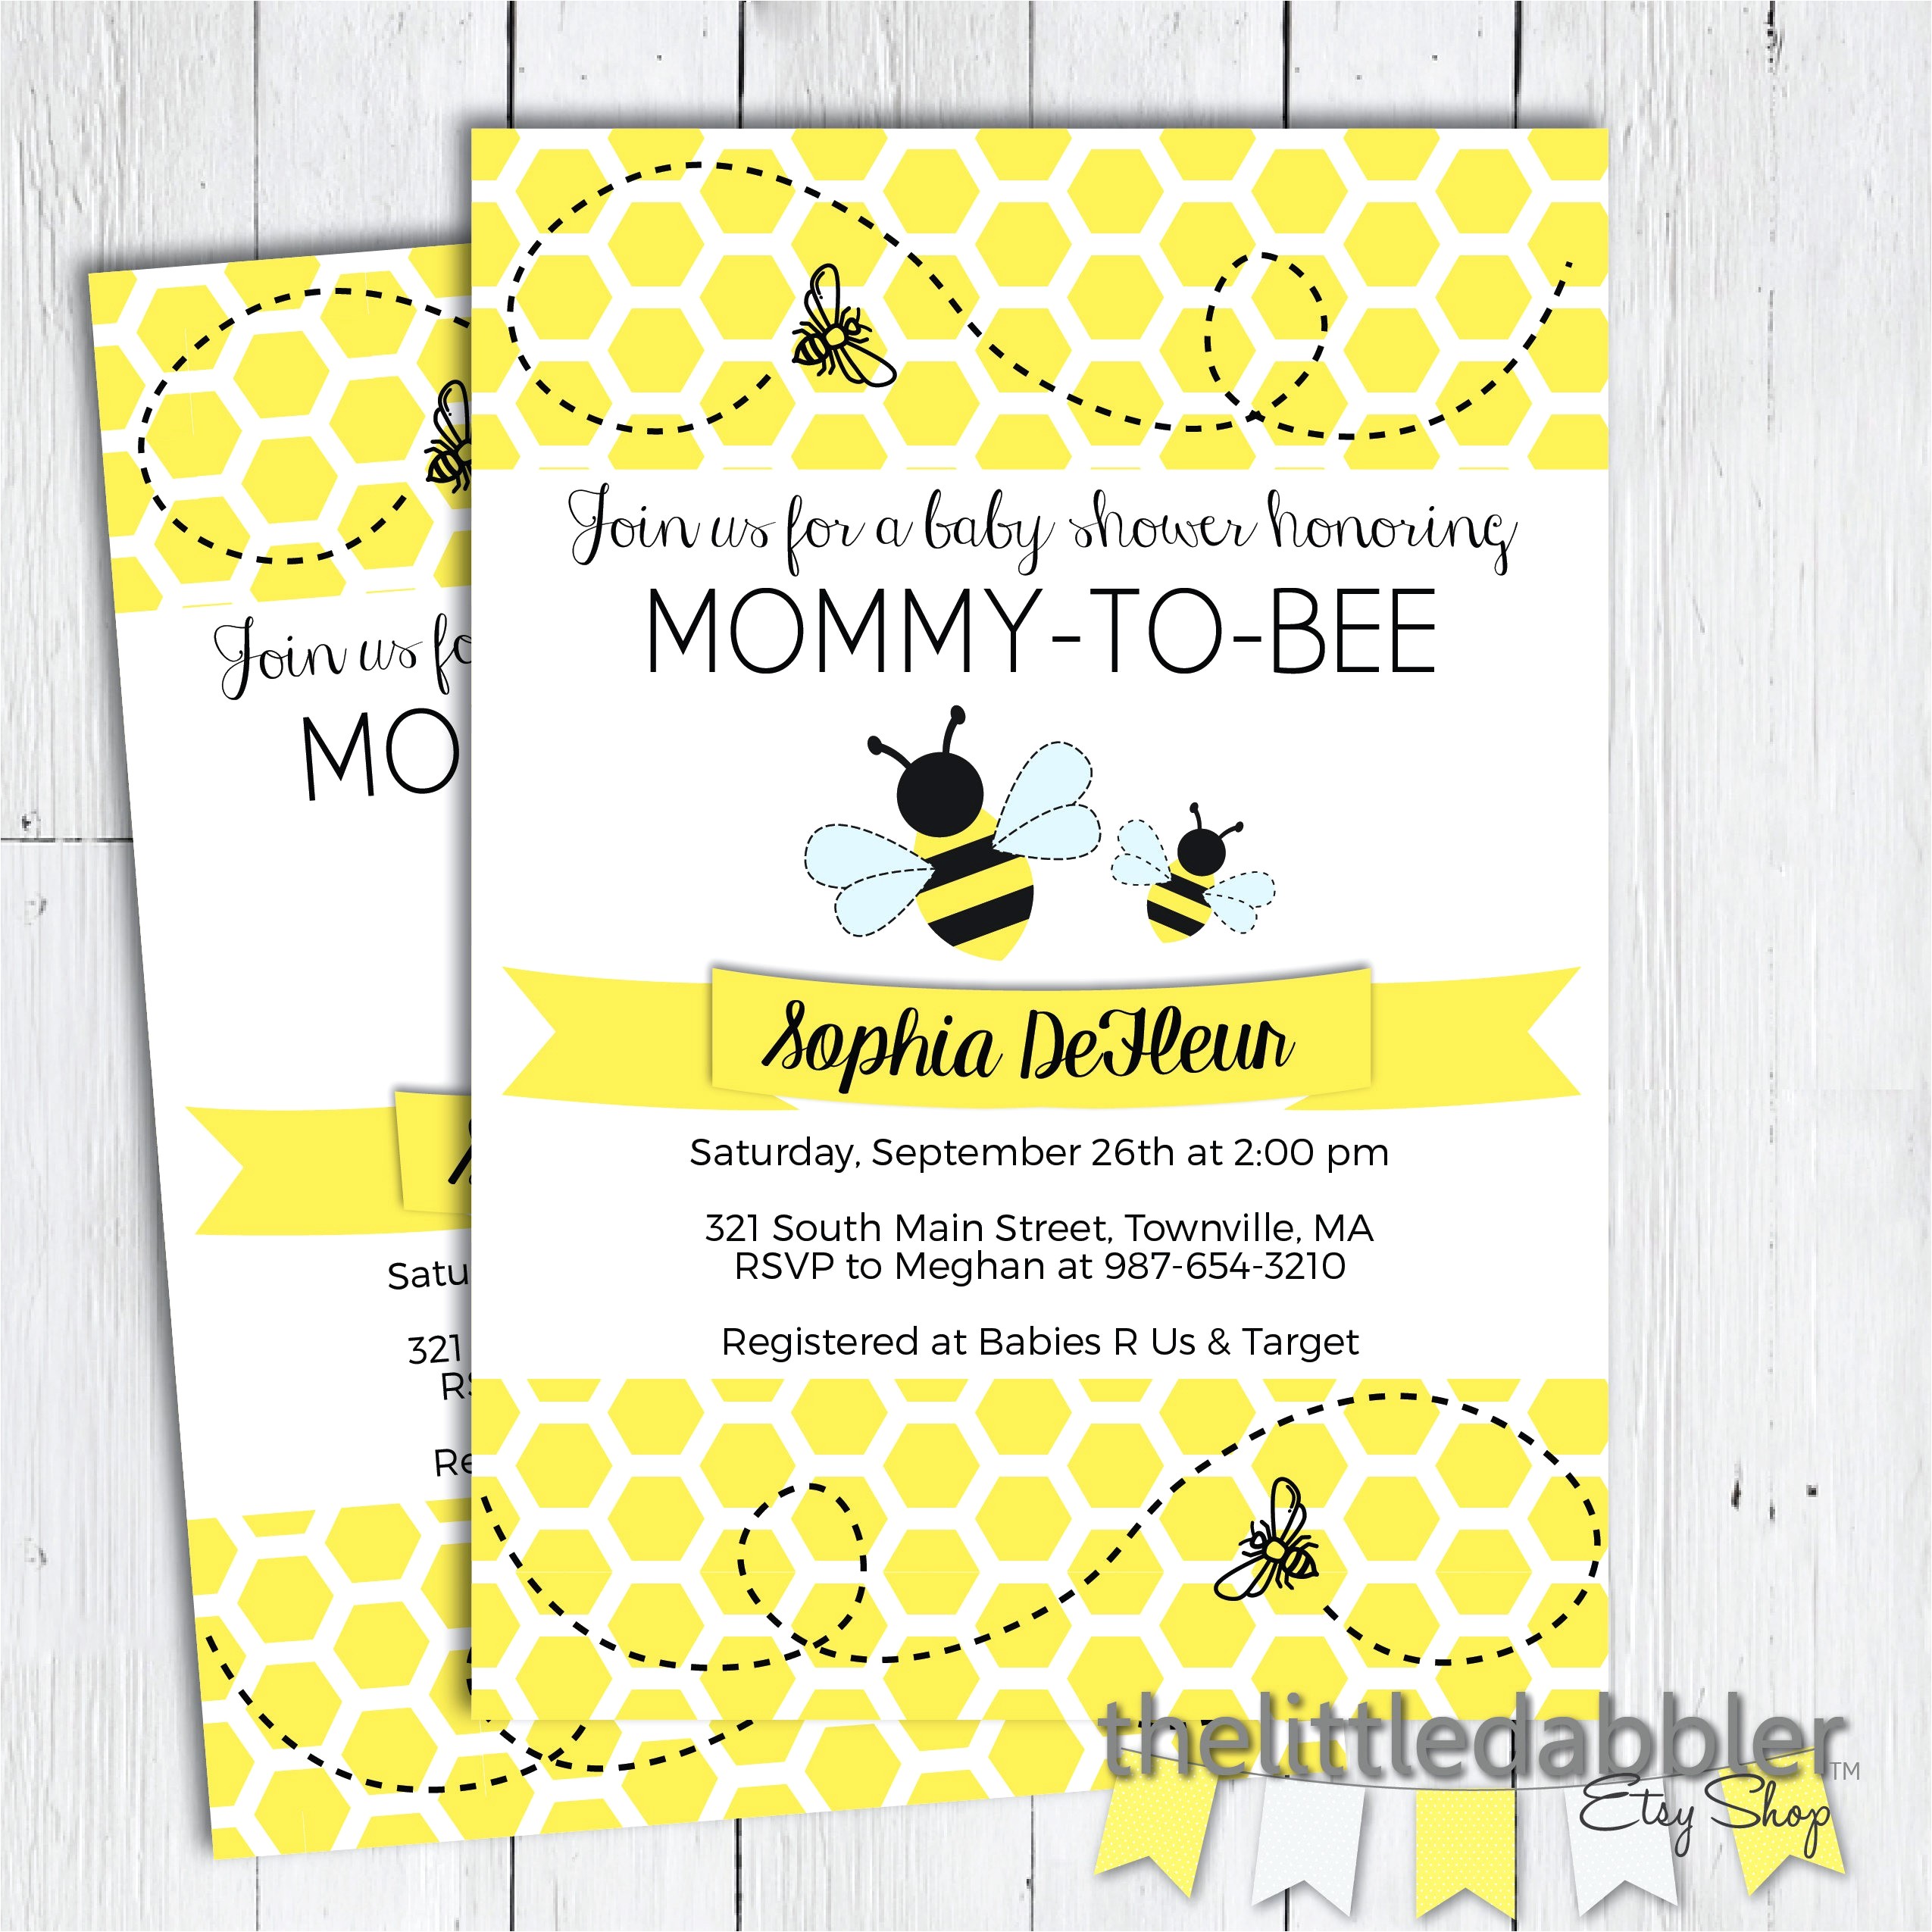 How to Fill Out A Baby Shower Invitation 46 Inspirational Photos Of How to Fill Out A Baby Shower Invitation